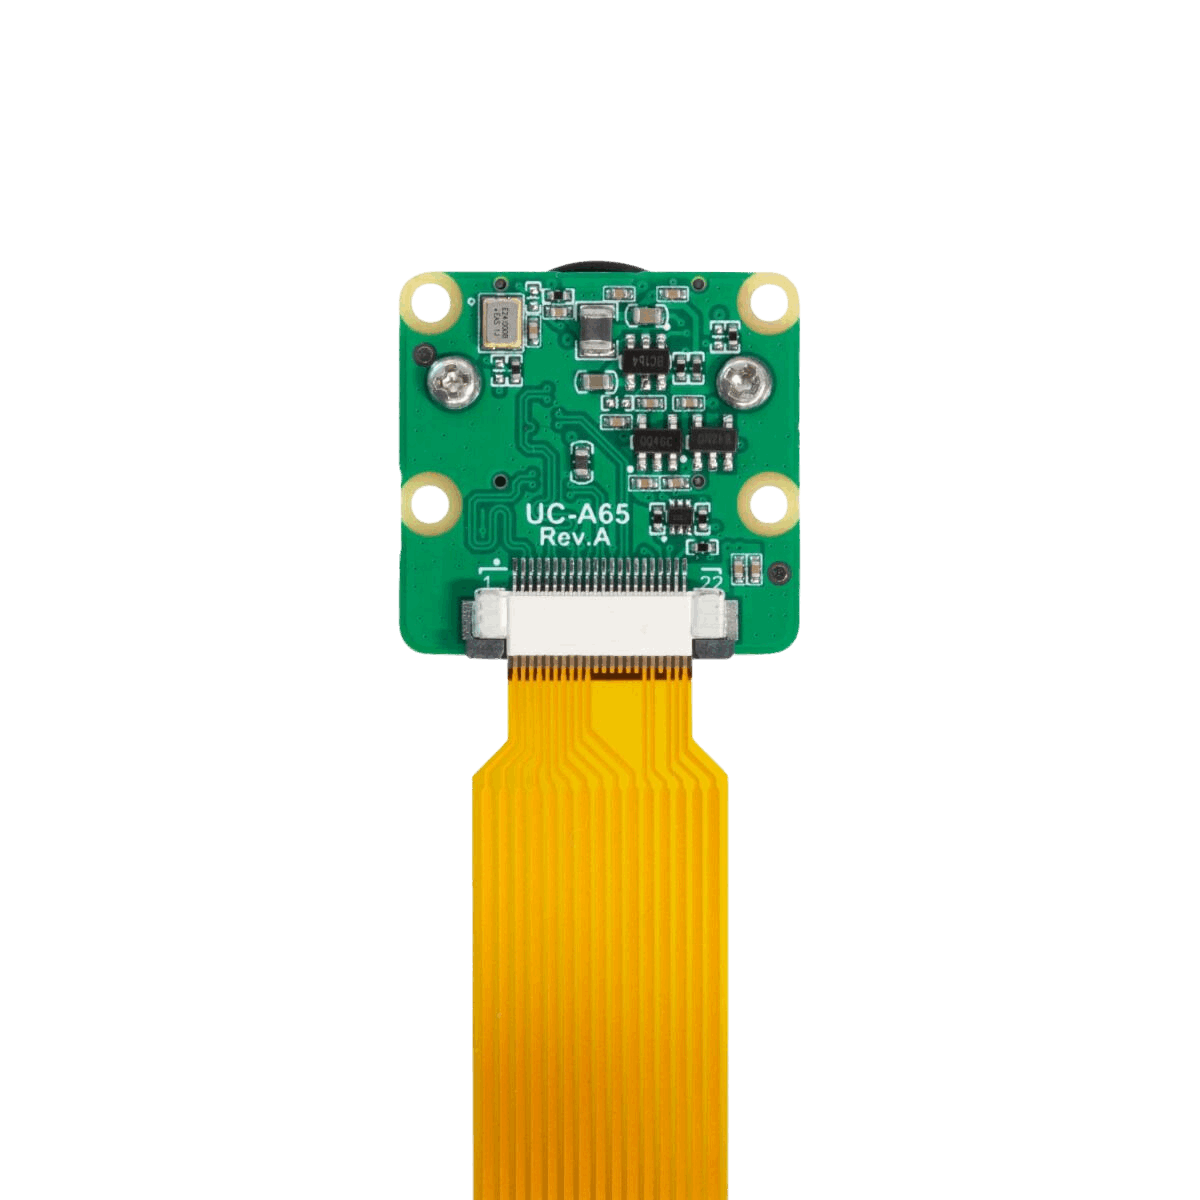 Image of the back of the B0310 camera module for Raspberry Pi